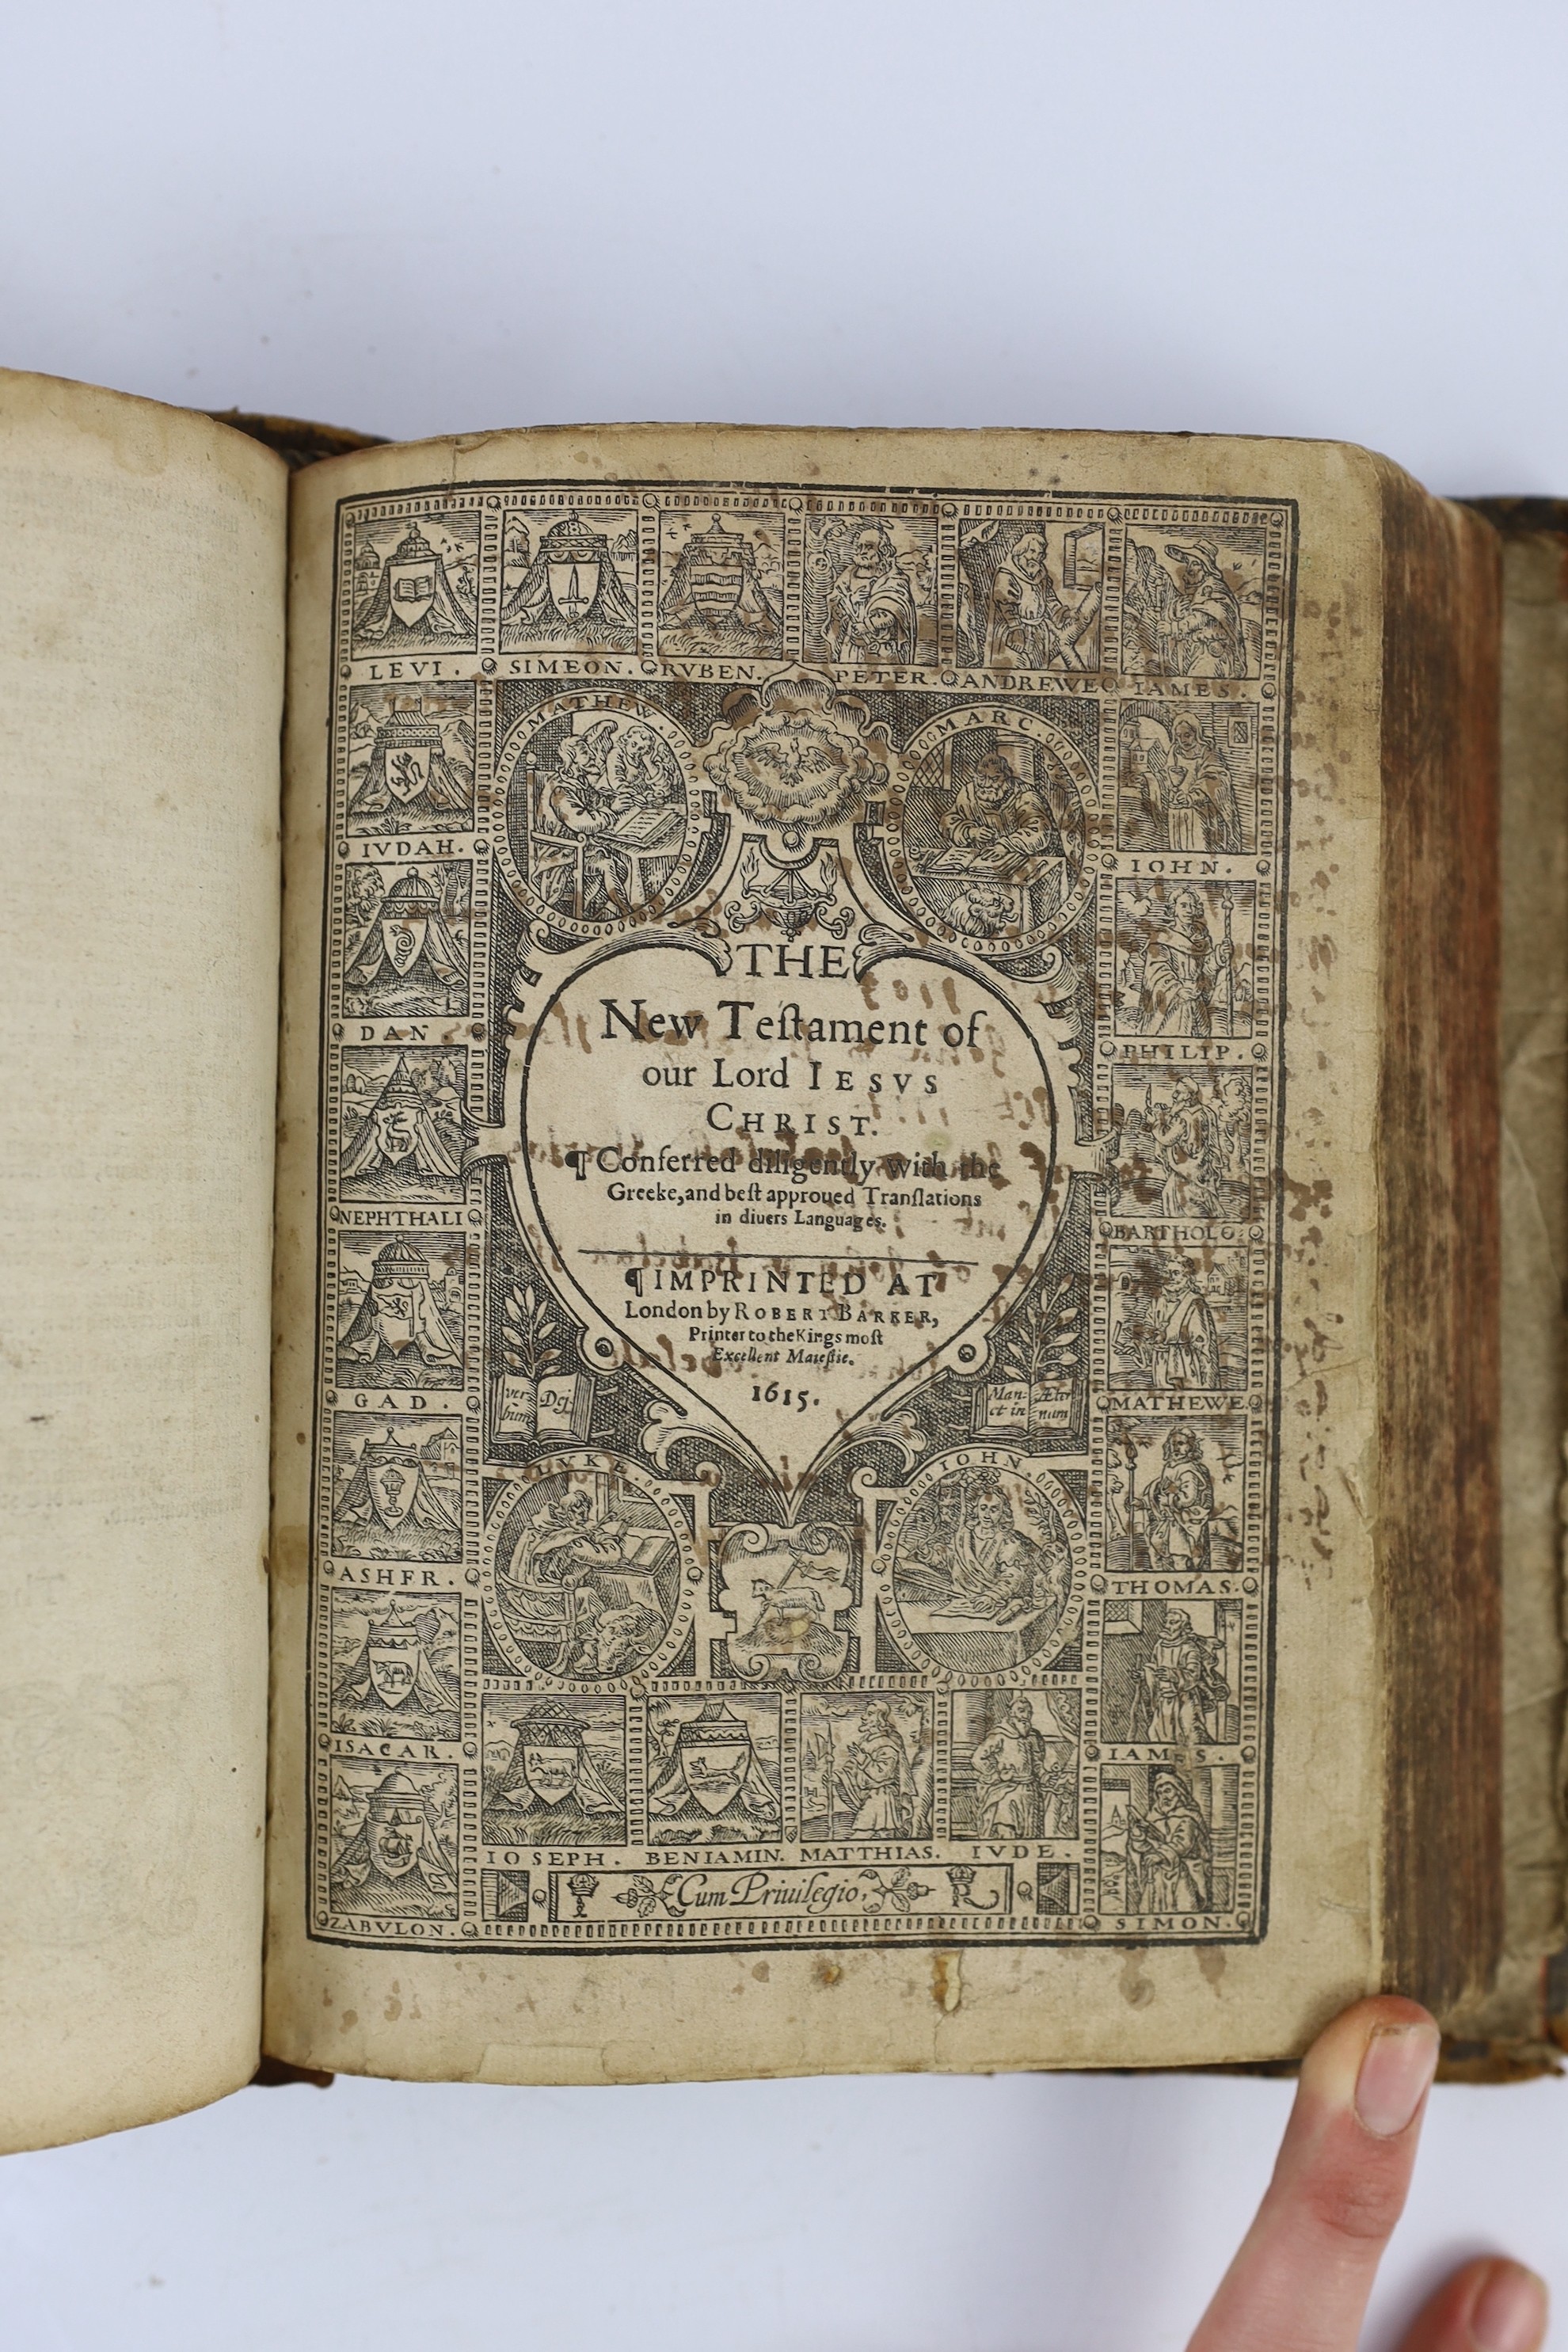 (The Bible - Geneva version, 1615) - The Bible: translated according to the Hebrew and Greeke, and conferred with the best translations in diverse languages...engraved pictorial titles (General and NT.), decorated initia